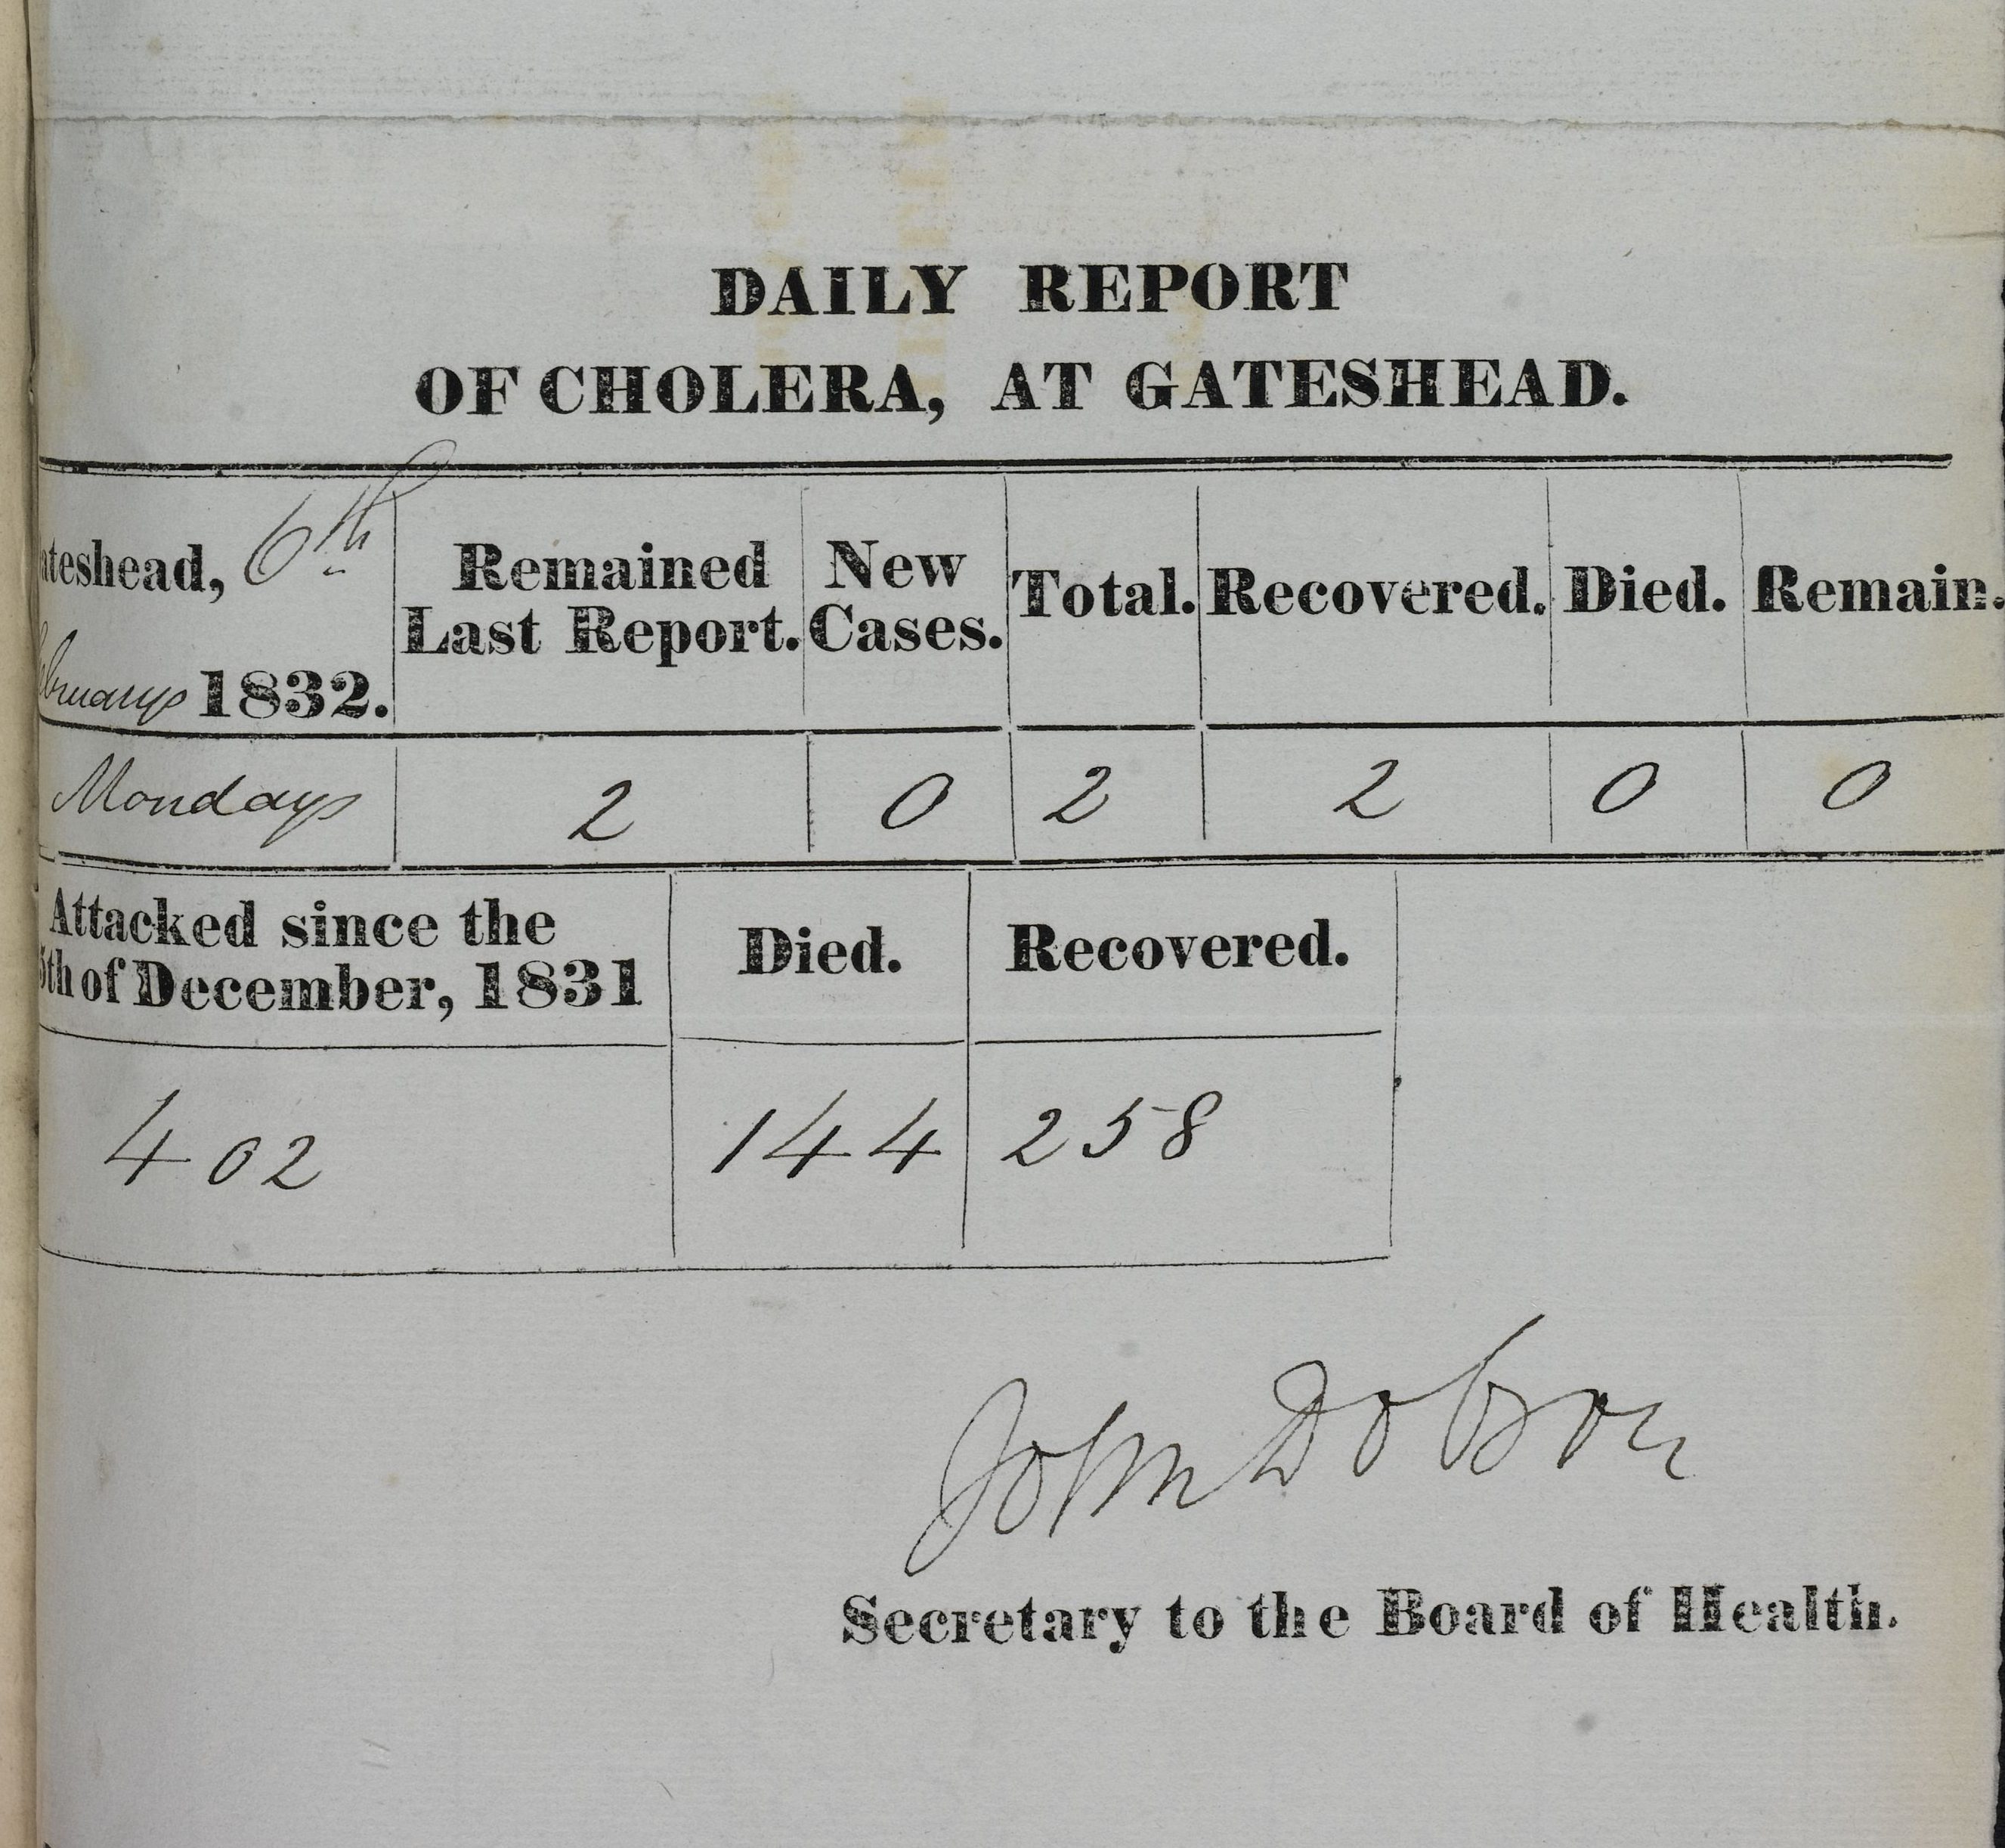 <p>This page is taken from a report detailing the number of deaths caused by Cholera in Gateshead. This page details the number of cholera cases and deaths on January 6 1832. It also shows how many people have died from Cholera in Gateshead since December 1831.</p>
